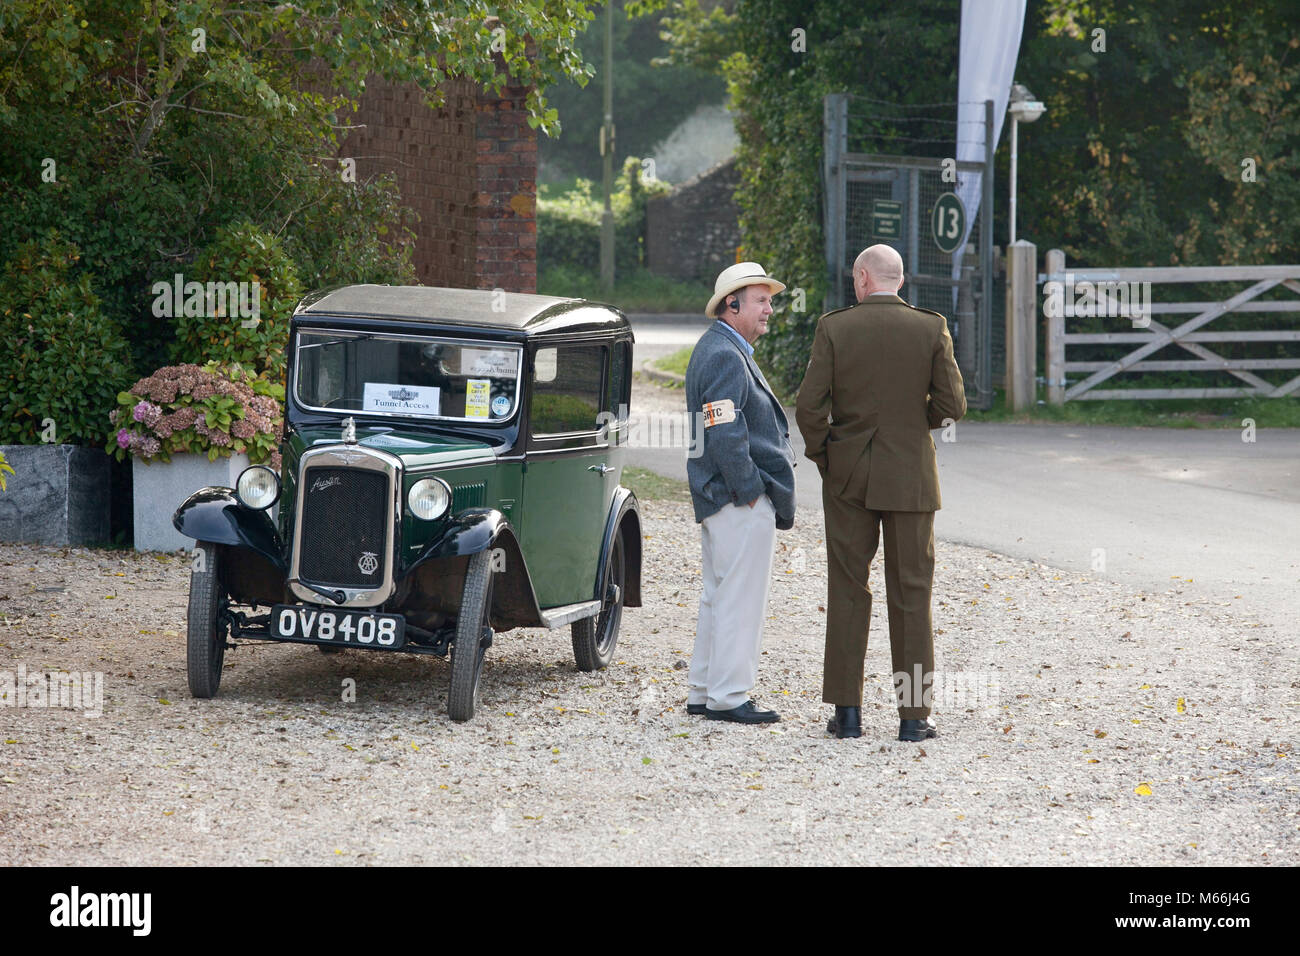 Classic green 1930's Austin car in green with black roof and two men in vintage clothes standing close to the vehicle in the grounds of goodwood Stock Photo